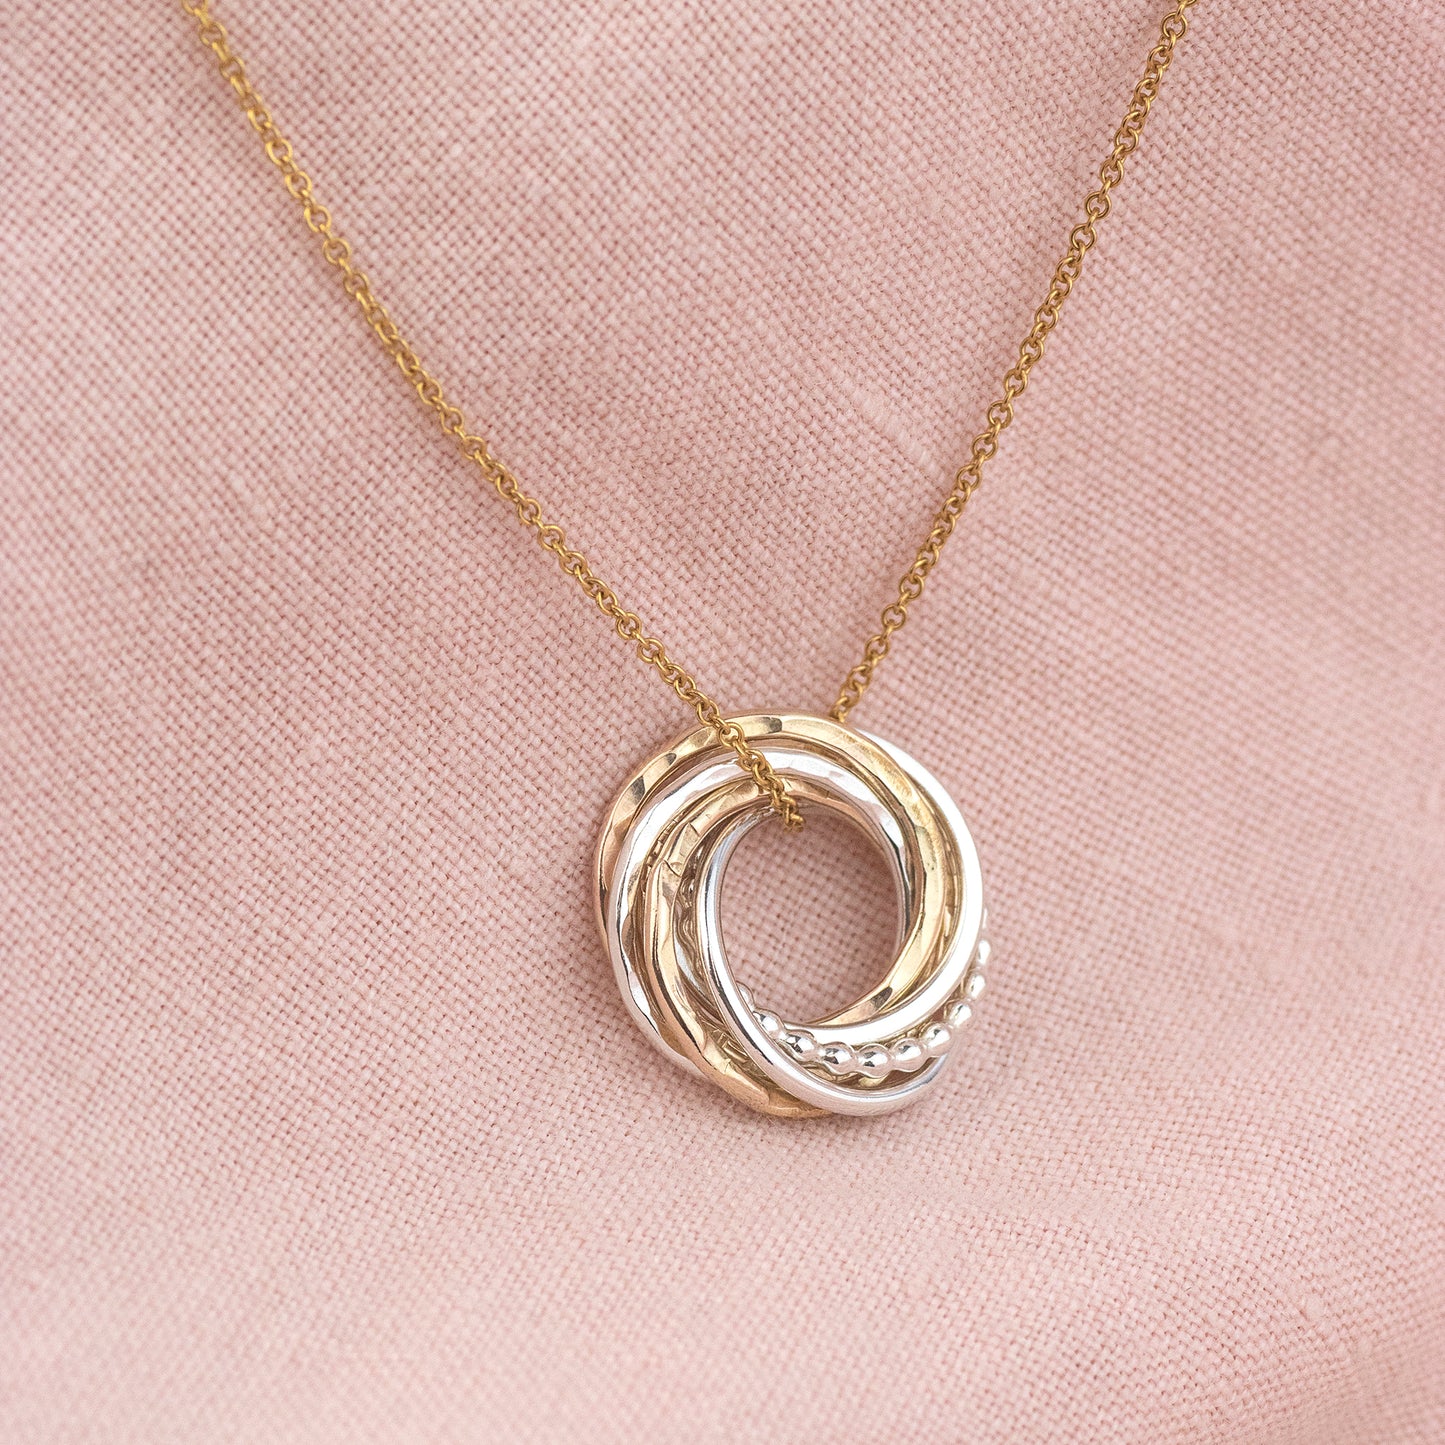 7th Anniversary Necklace - The Original 7 Rings for 7 Years Necklace - Silver & Gold